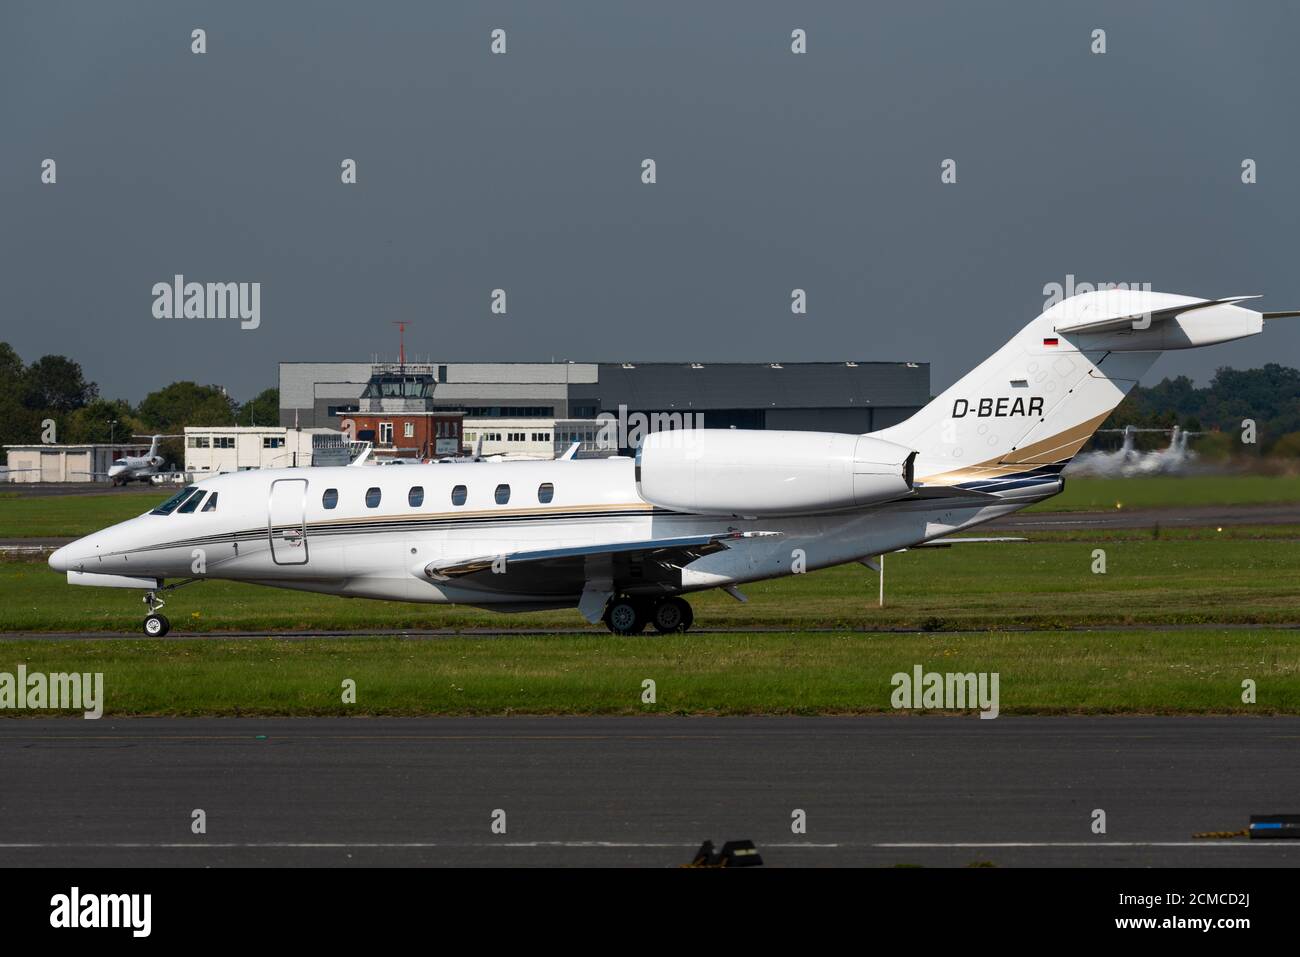 Cessna 750 Citation X executive jet plane D-BEAR owned by Air X Charter taxiing at Biggin Hill Airport, Kent, UK. AirX Charter air travel business Stock Photo